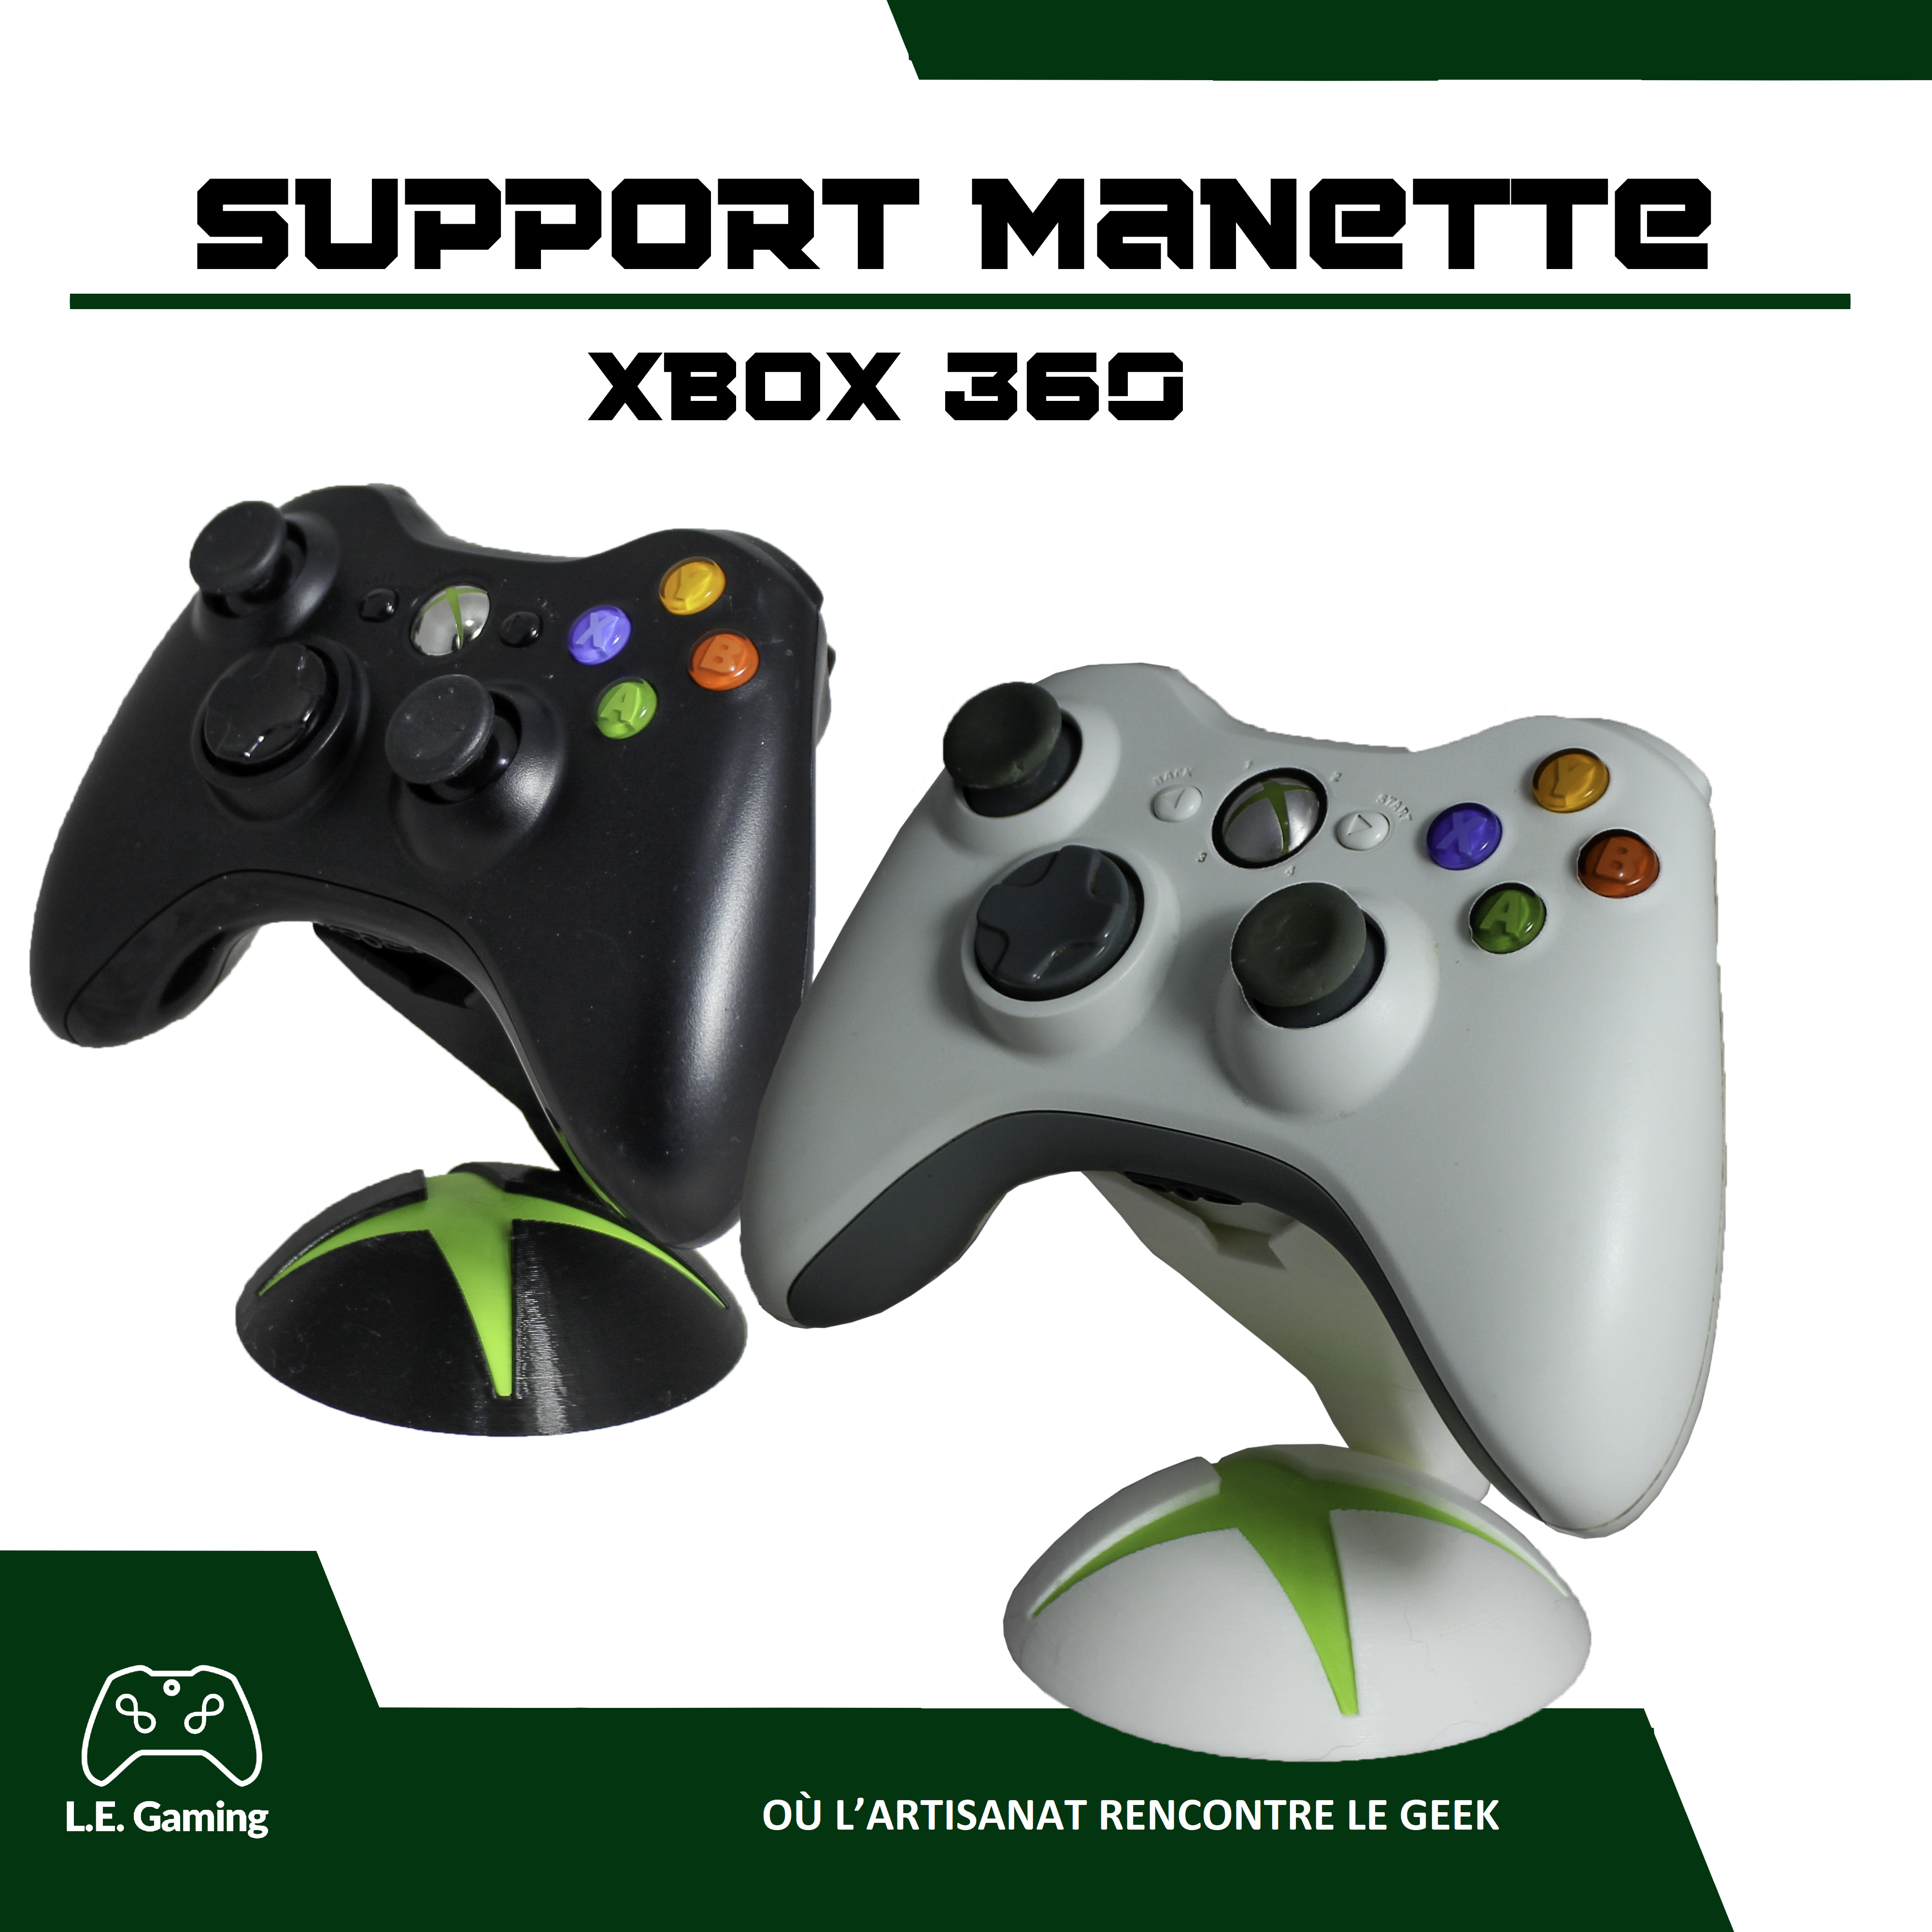 Support Manette Xbox 360 – legaming88